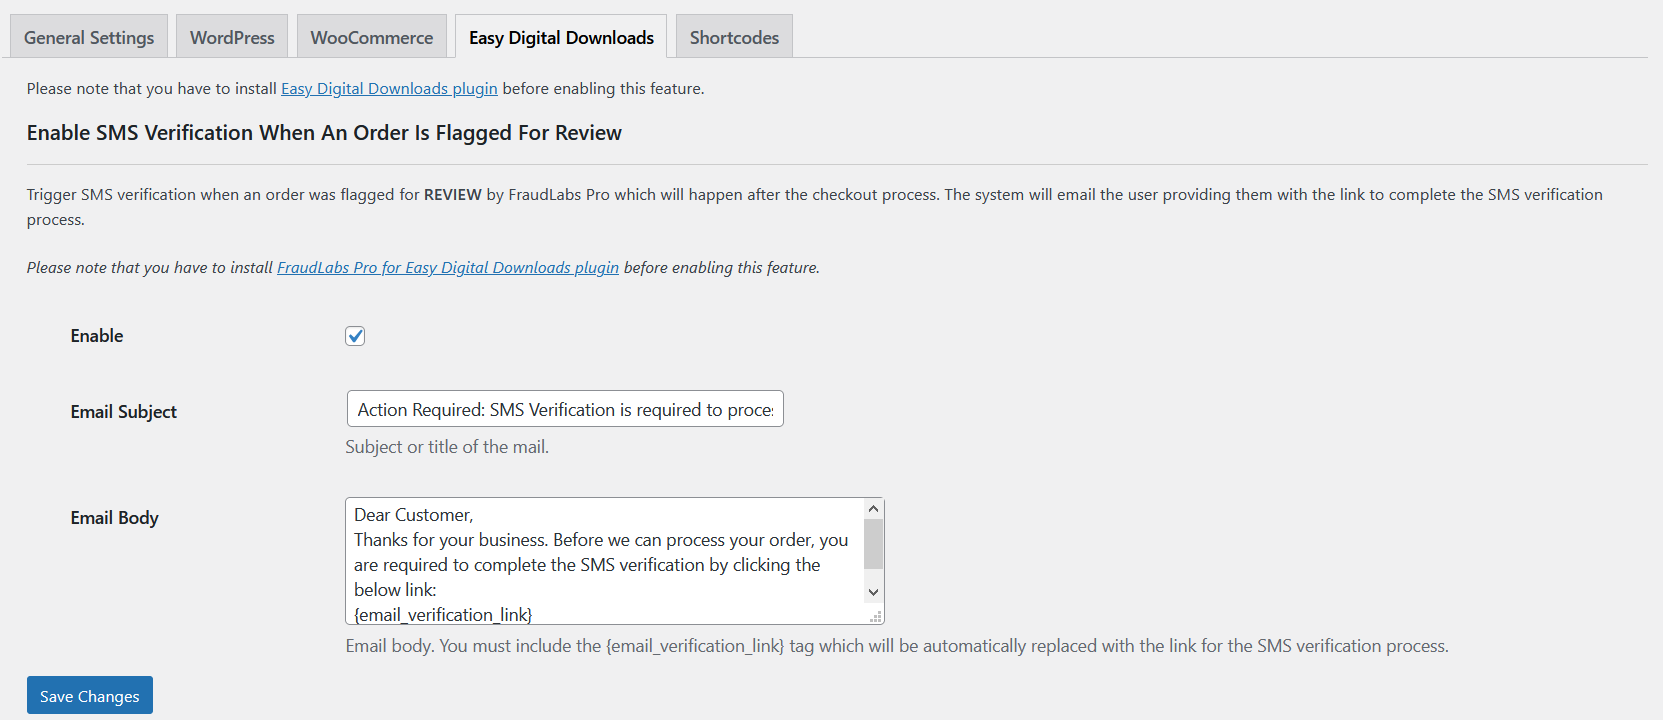 FraudLabs Pro SMS Verification Settings For Manual Review Order